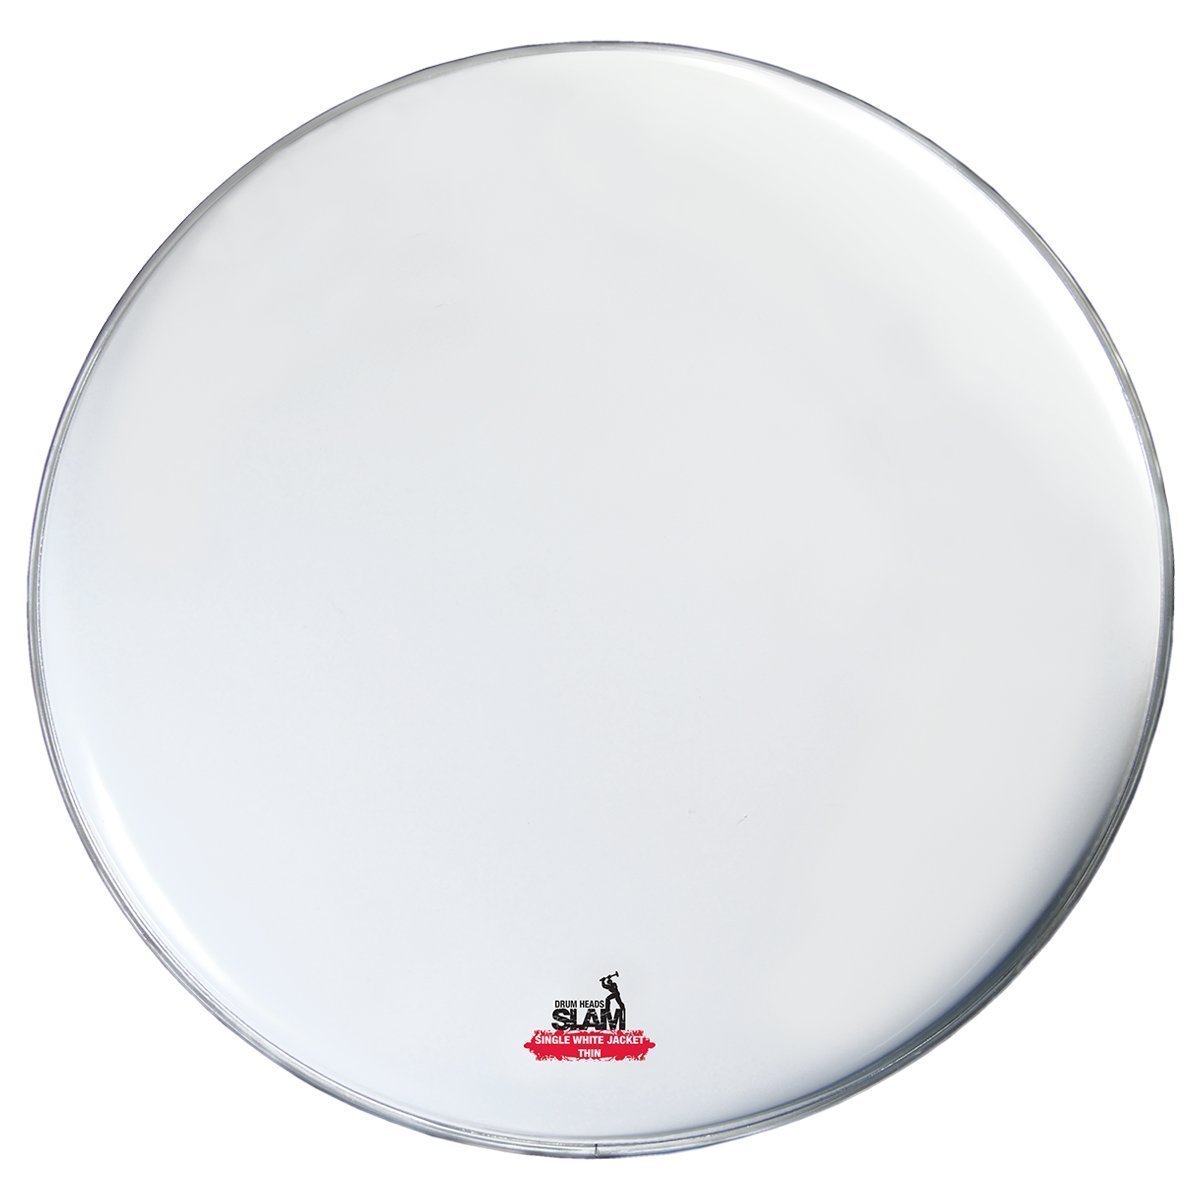 Slam Single Ply Smooth Coated Thin Weight Drum Head (16")-SDH-1PCT-T16